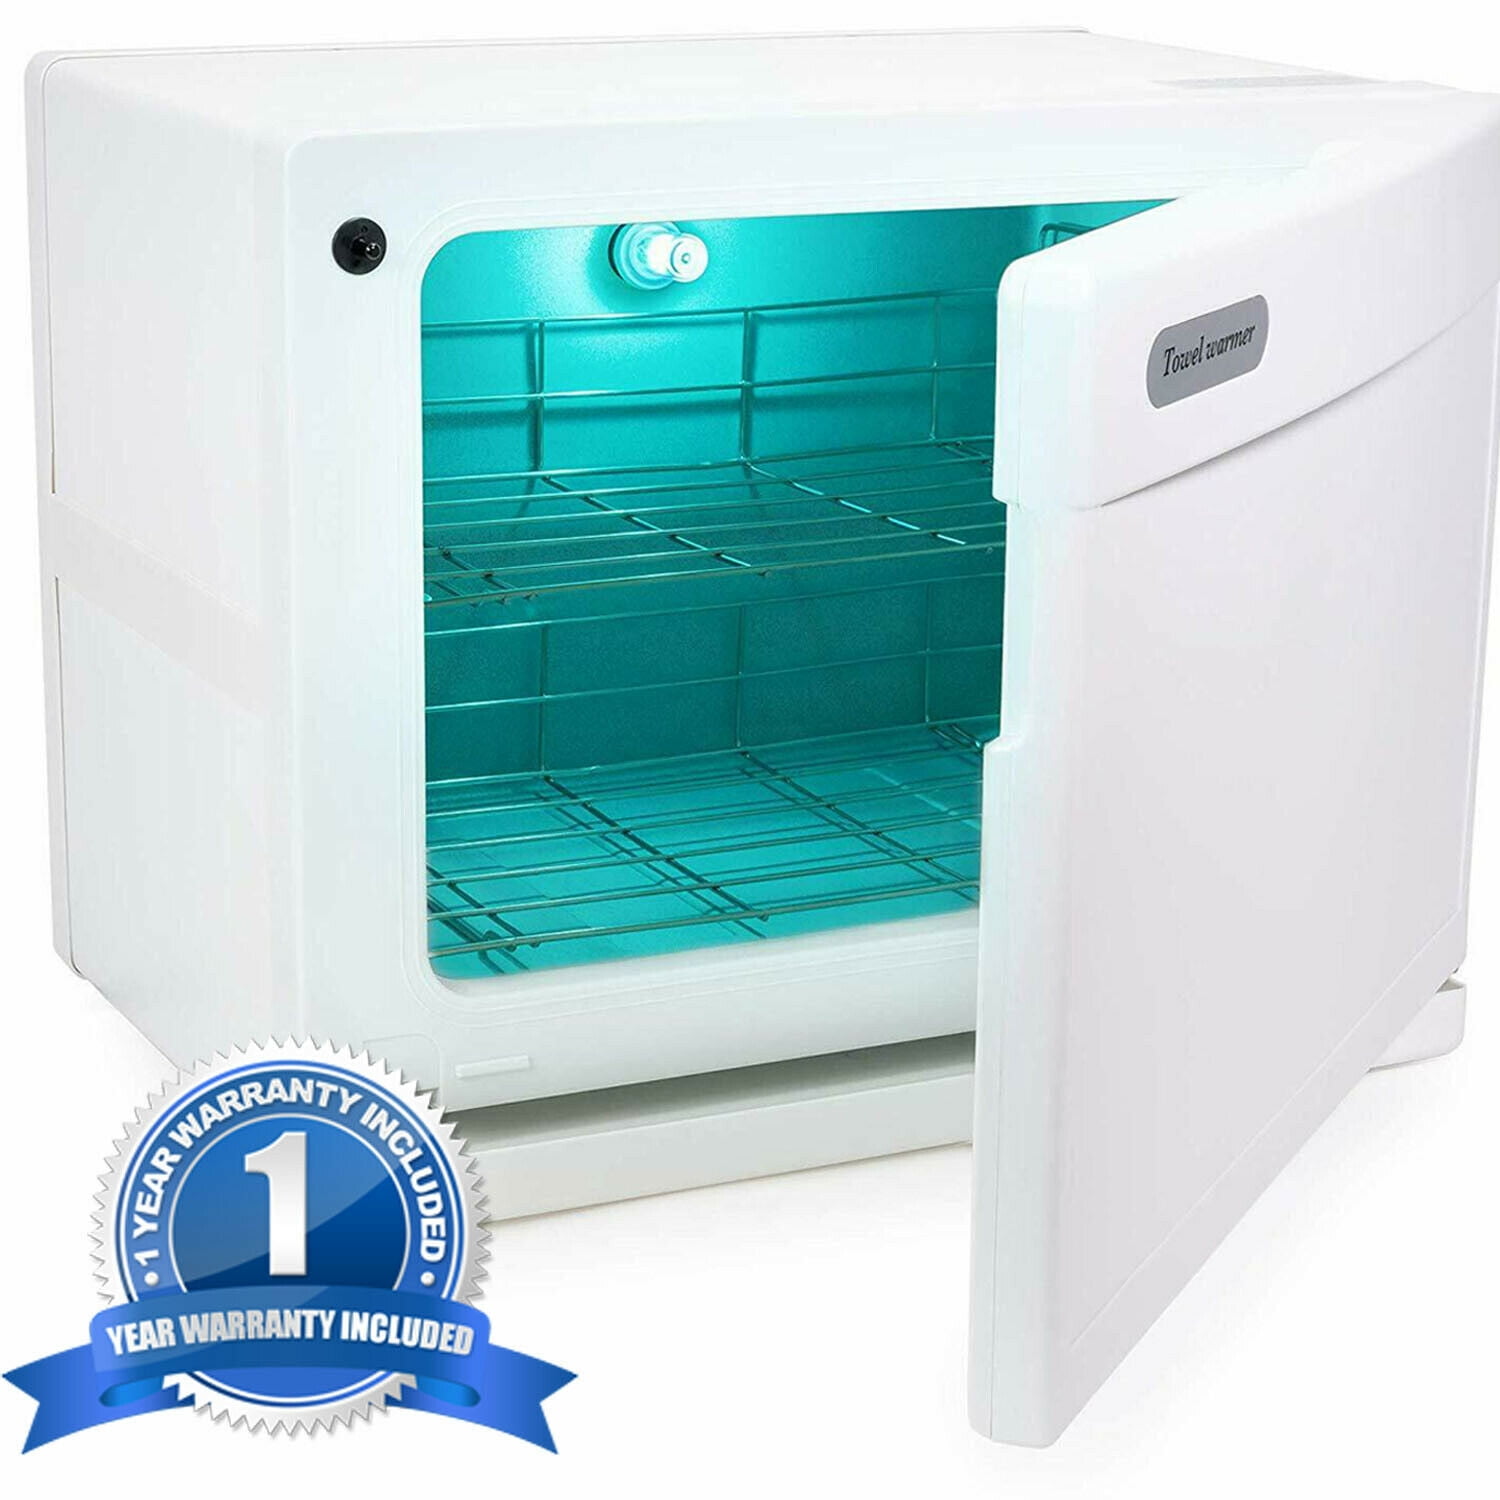 Hot Towel Warmer Cabinet Facial Spa and Salon Equipment Ozone/UV/Infrared Low Temperature White